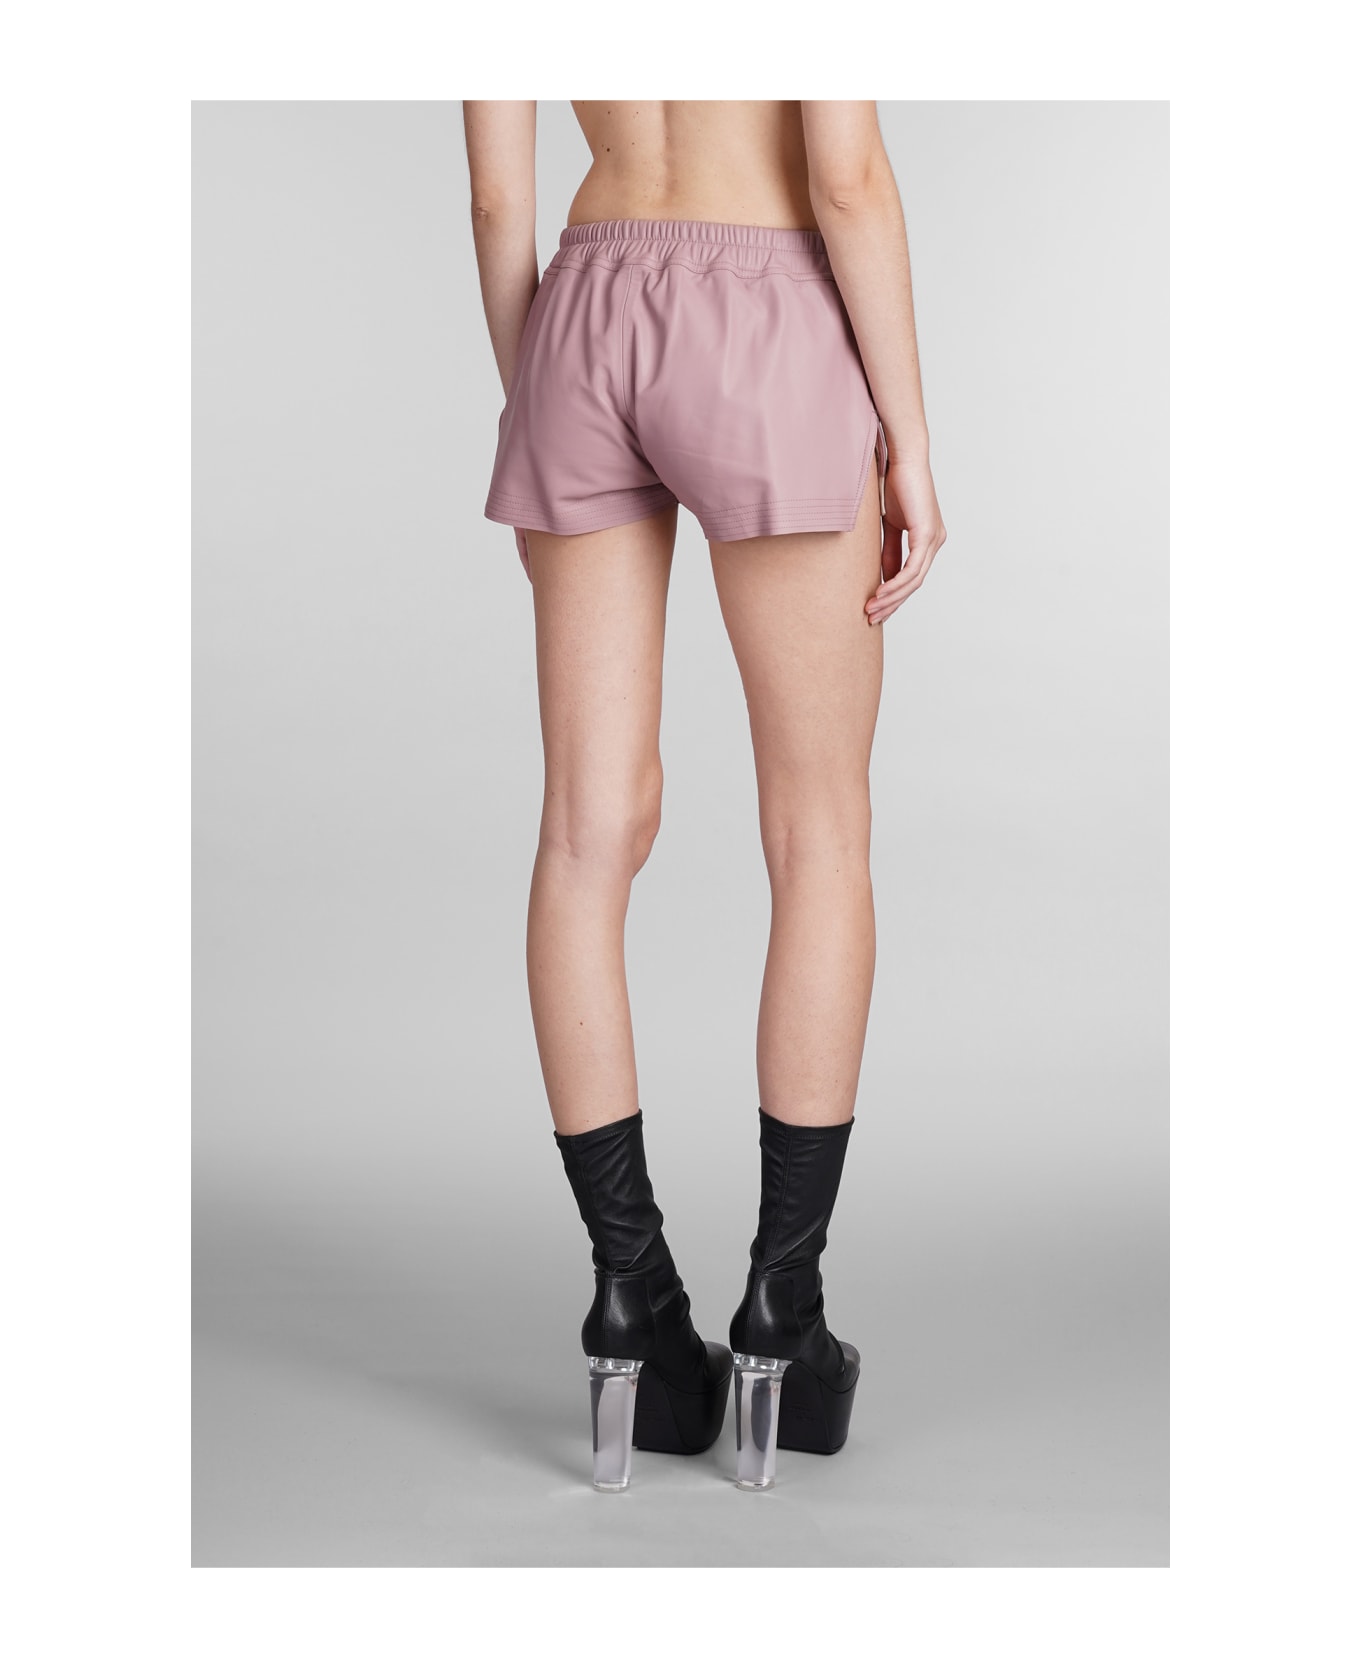 Rick Owens Fog Boxers Shorts In Rose-pink Leather - rose-pink